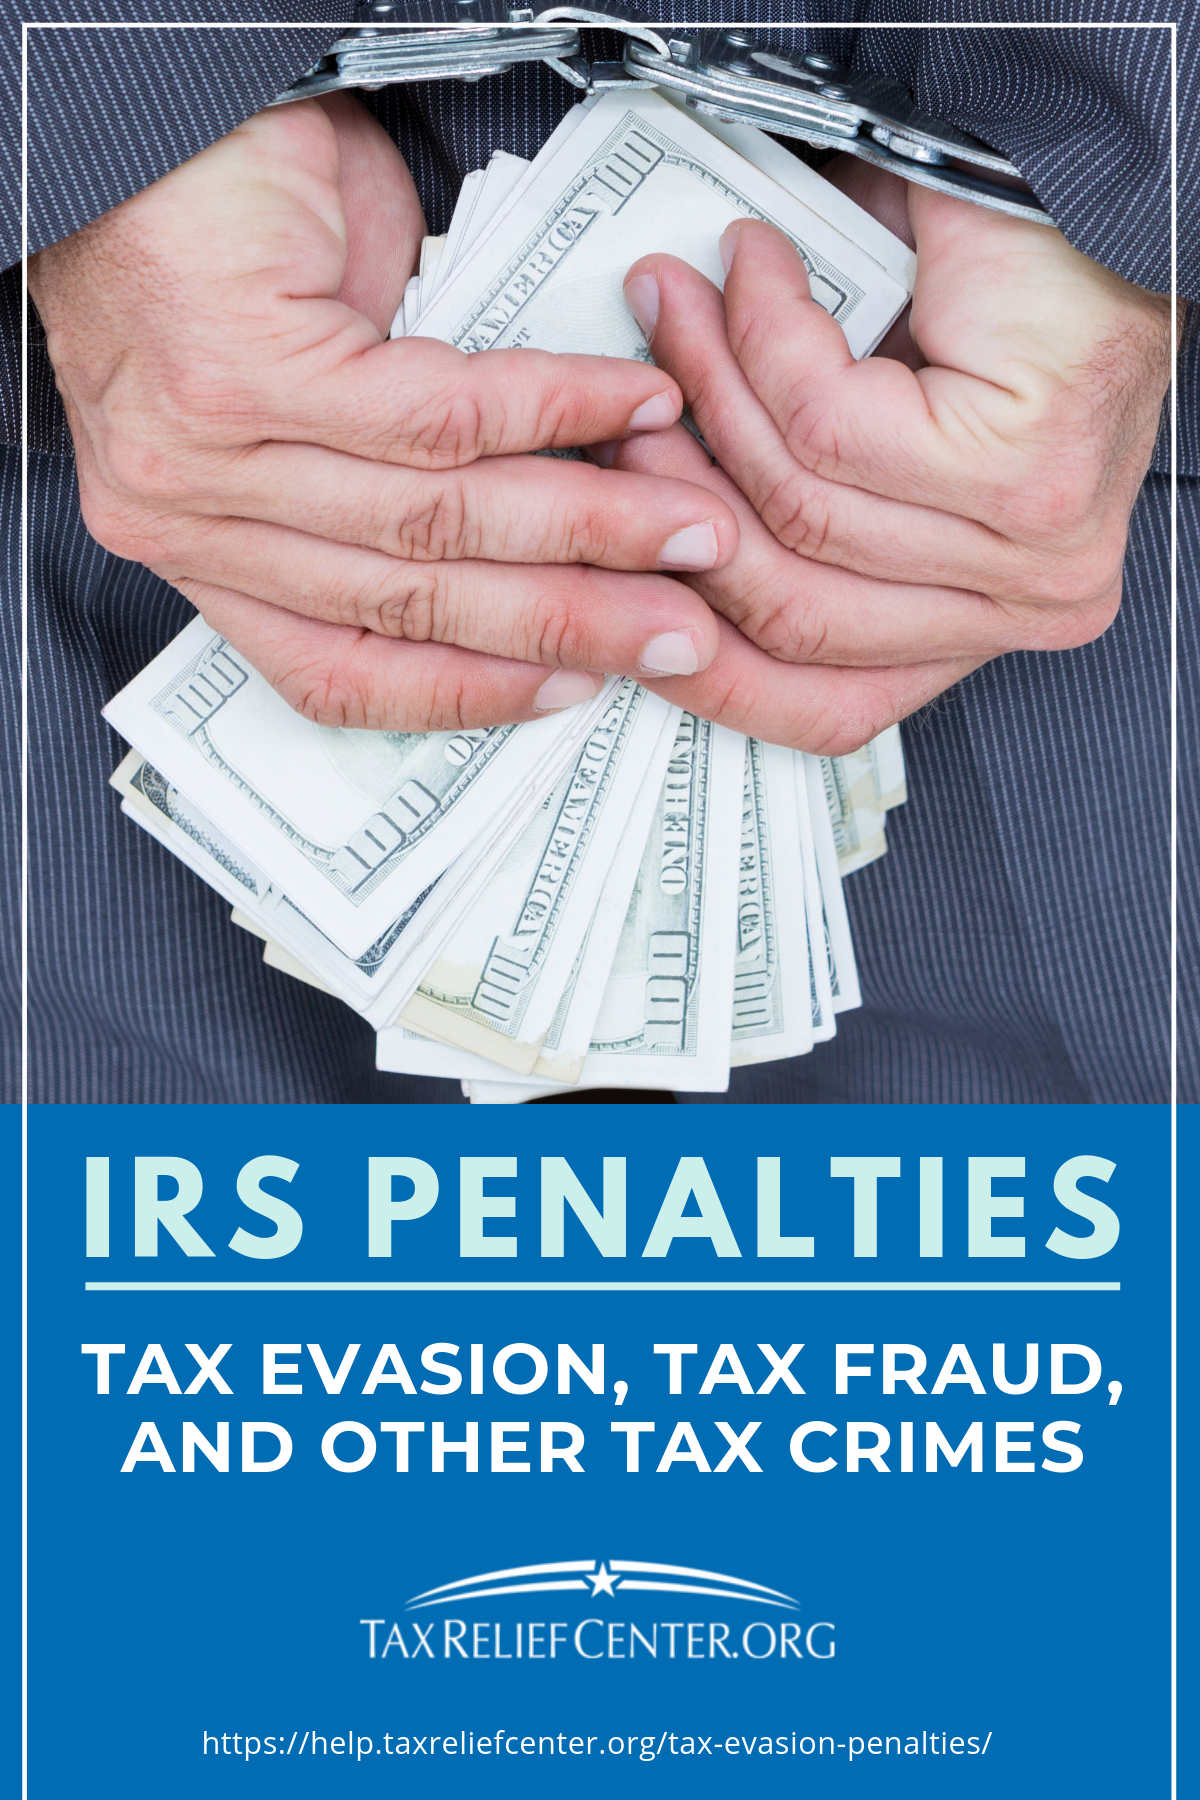 IRS Penalties: Tax Evasion, Tax Fraud, And Other Tax Crimes https://help.taxreliefcenter.org/tax-evasion-penalties/